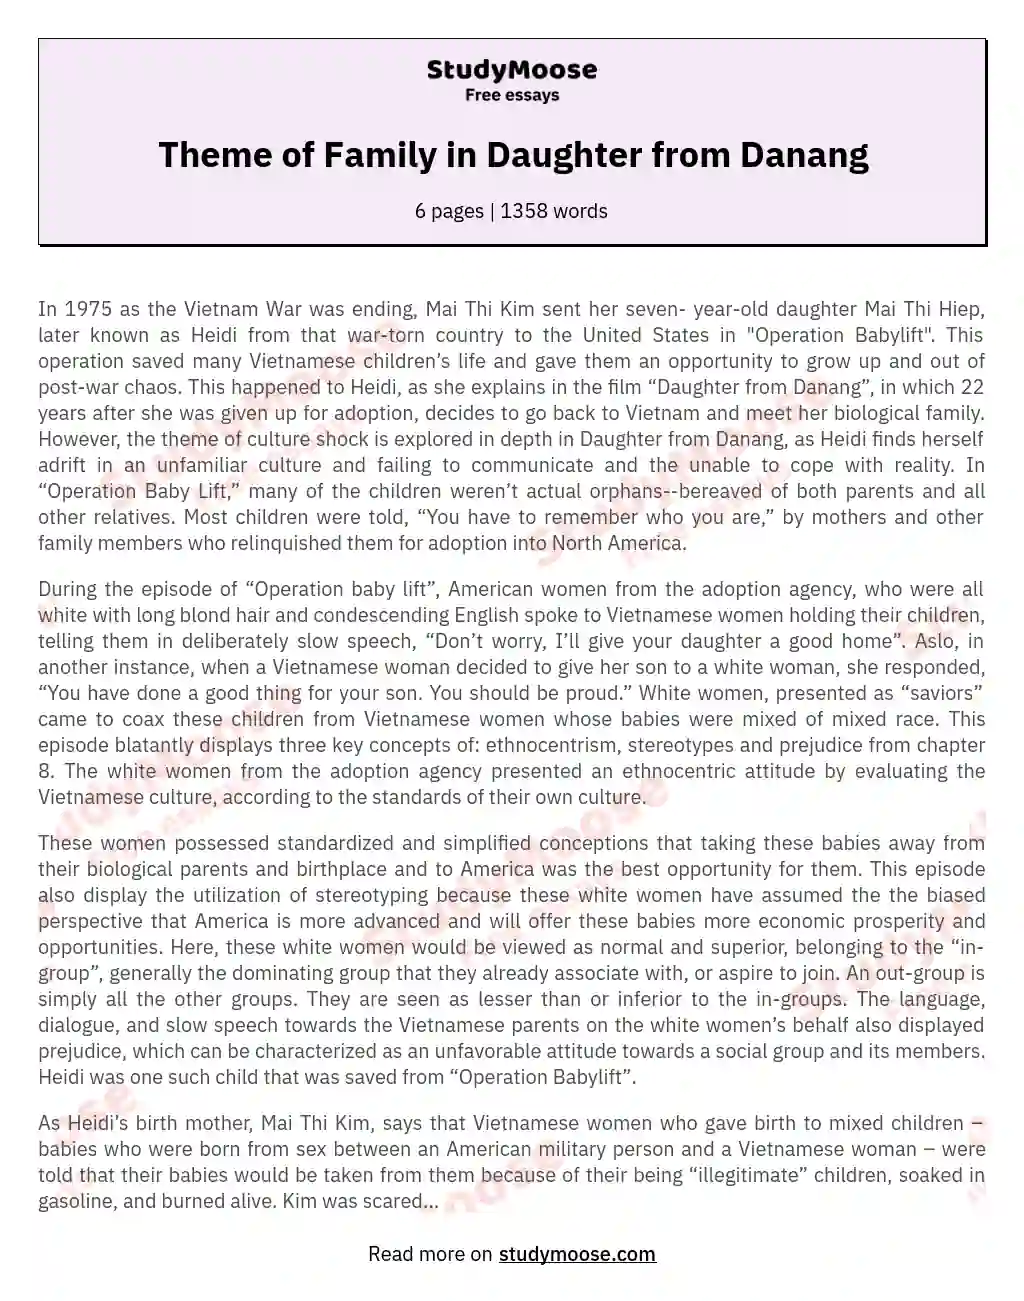 Theme of Family in Daughter from Danang essay